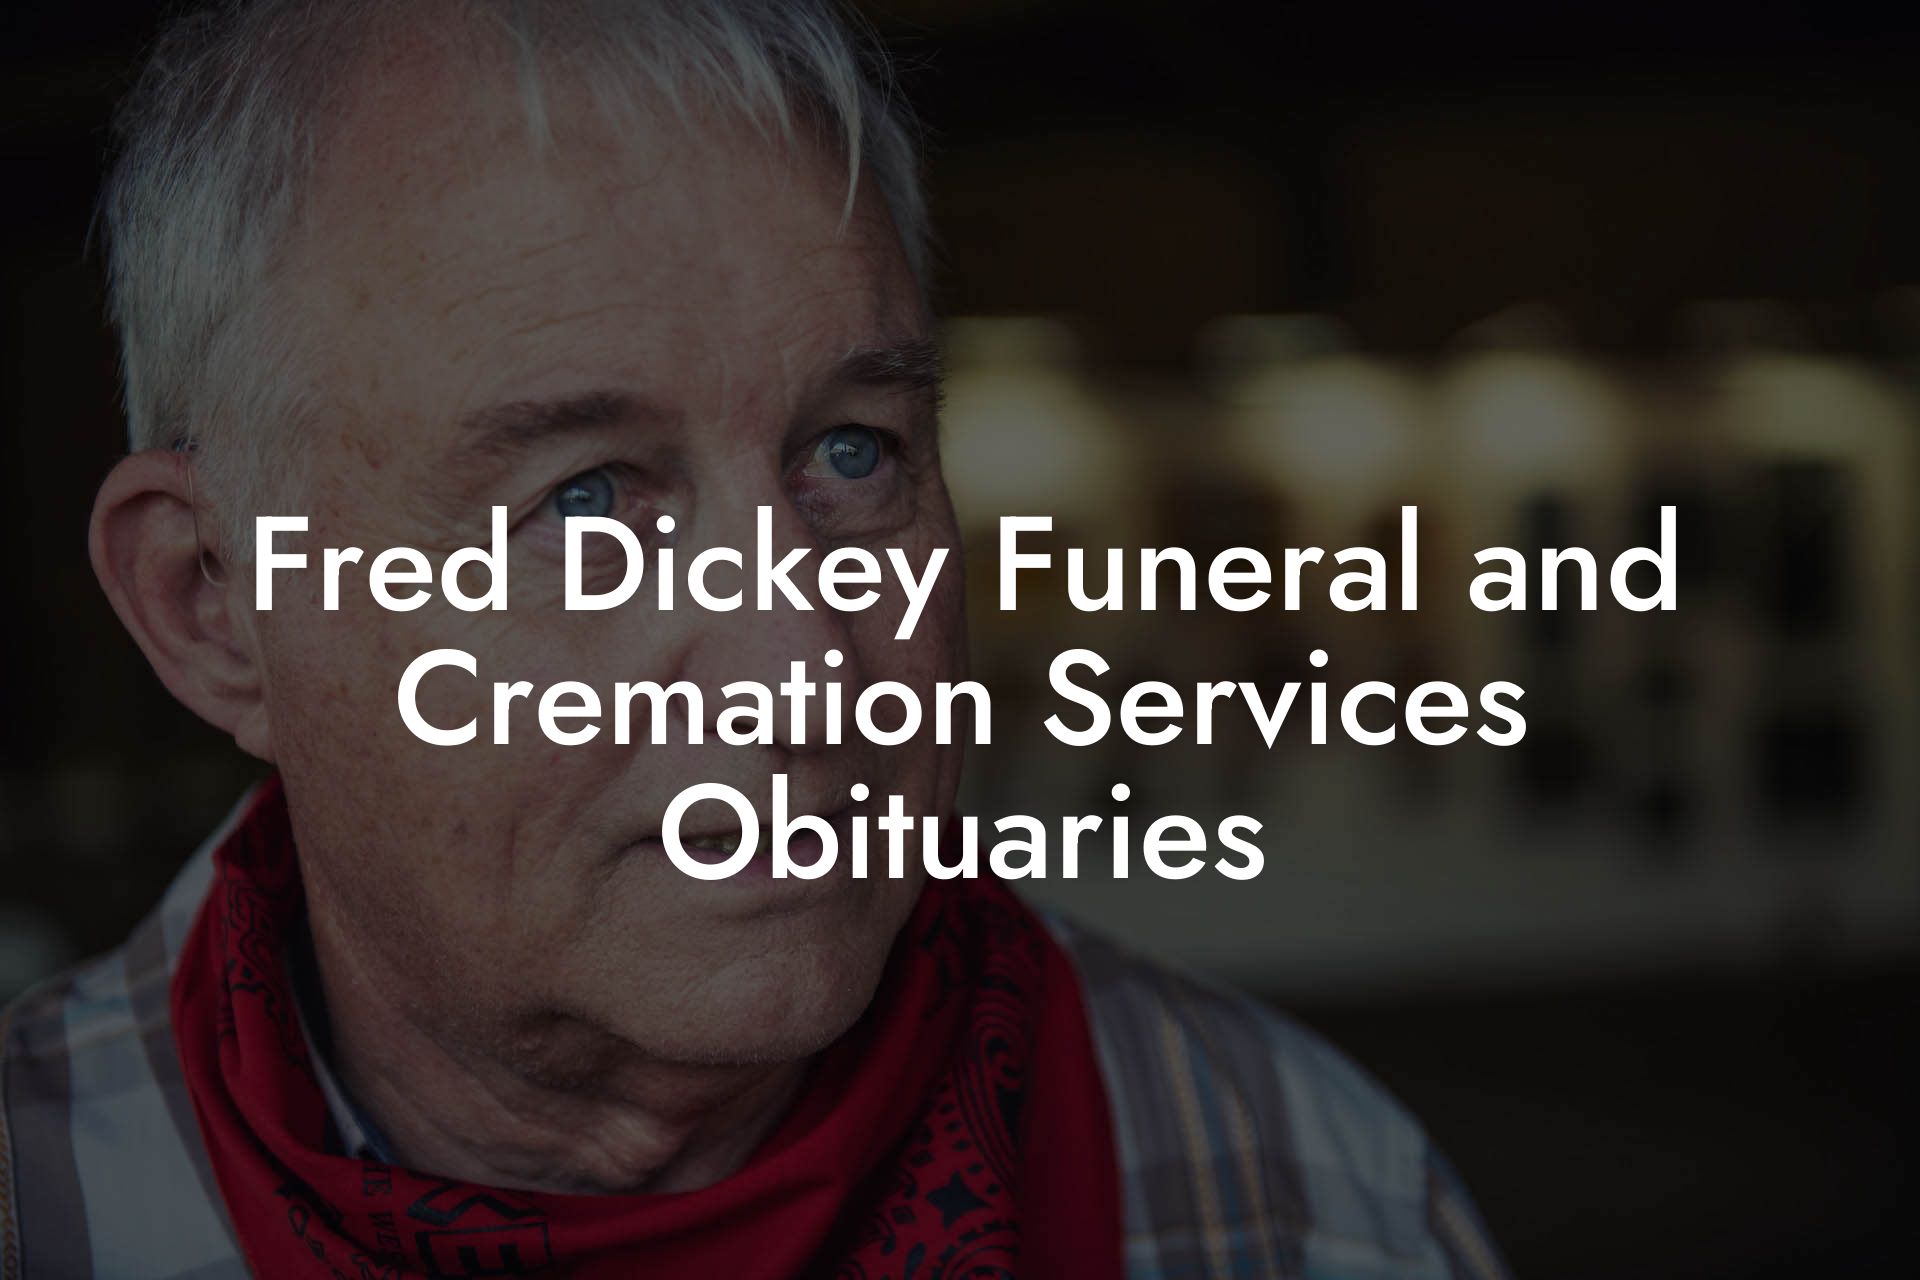 Fred Dickey Funeral and Cremation Services Obituaries